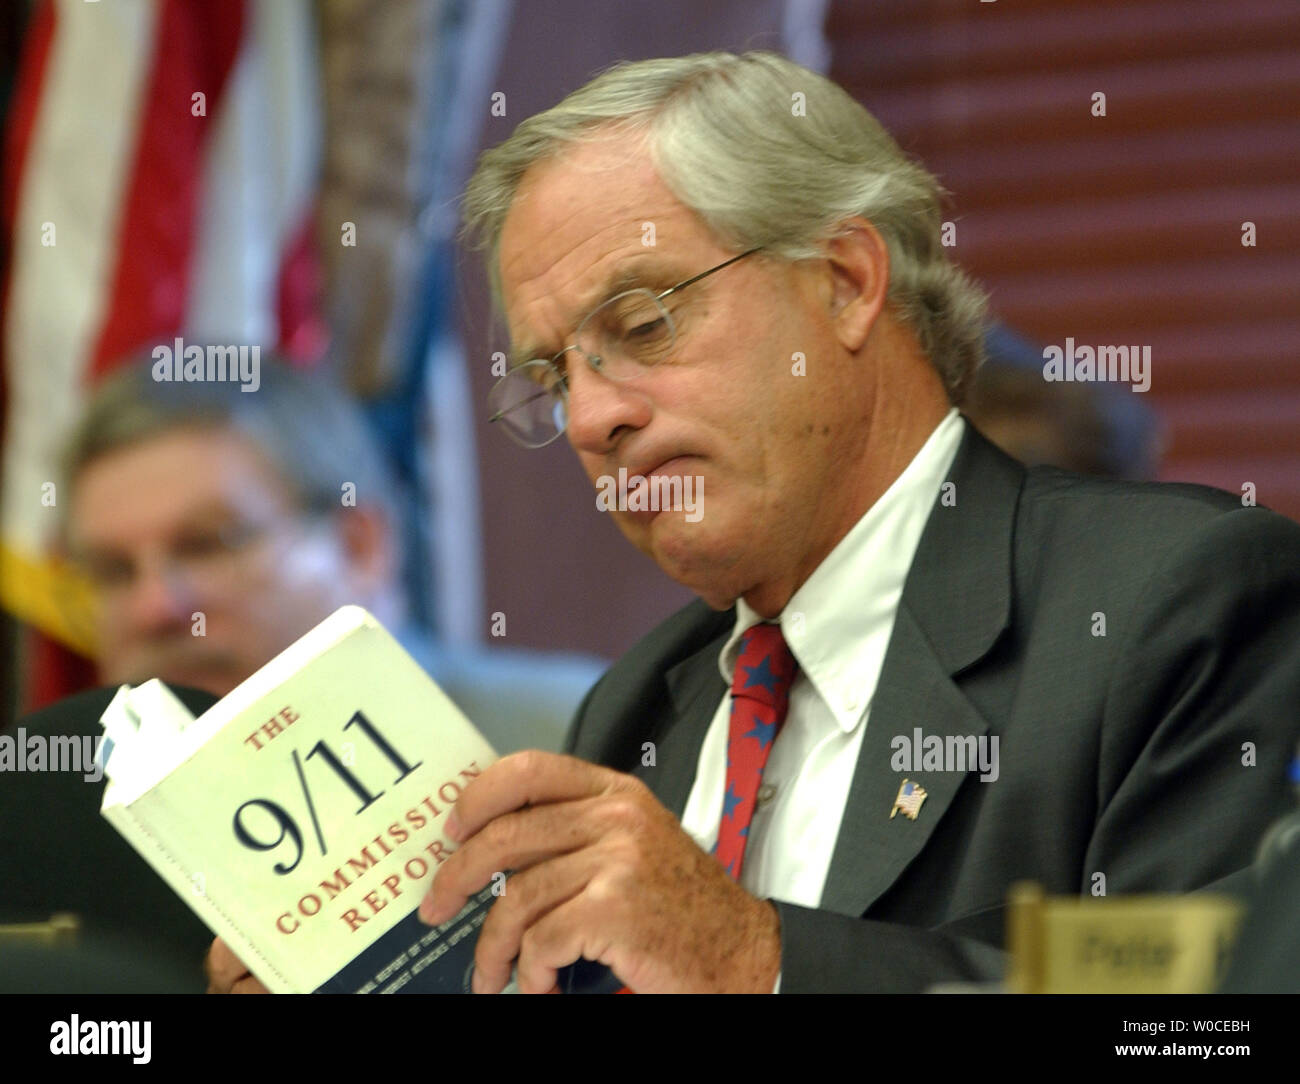 Newly nominated Director of the CIA Rep. Porter Goss, R-FL, reads a copy of the 9/11 Commission's report while Thomas Kean, not shown, testifies before the Full House Intelligence Committee on August 11, 2004 in Washington.  The committee is examining the 9/11 Committee's recommendation to create an intelligence chief to over see all of America's intelligence services.   (UPI Photo/Michael Kleinfeld) Stock Photo